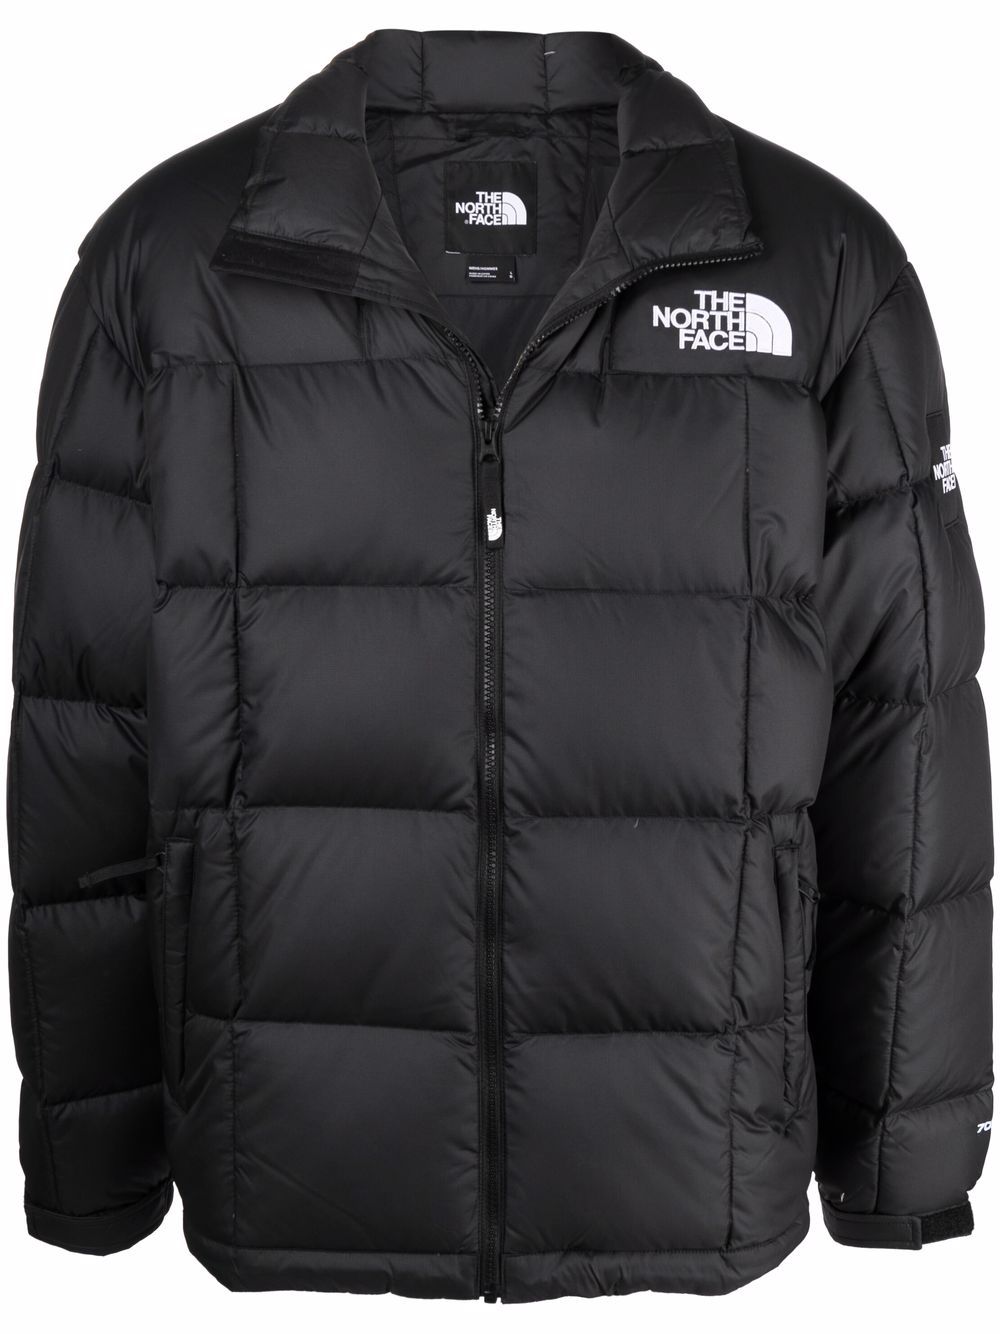 The North Face Nuptse 1996 padded jacket - Black von The North Face